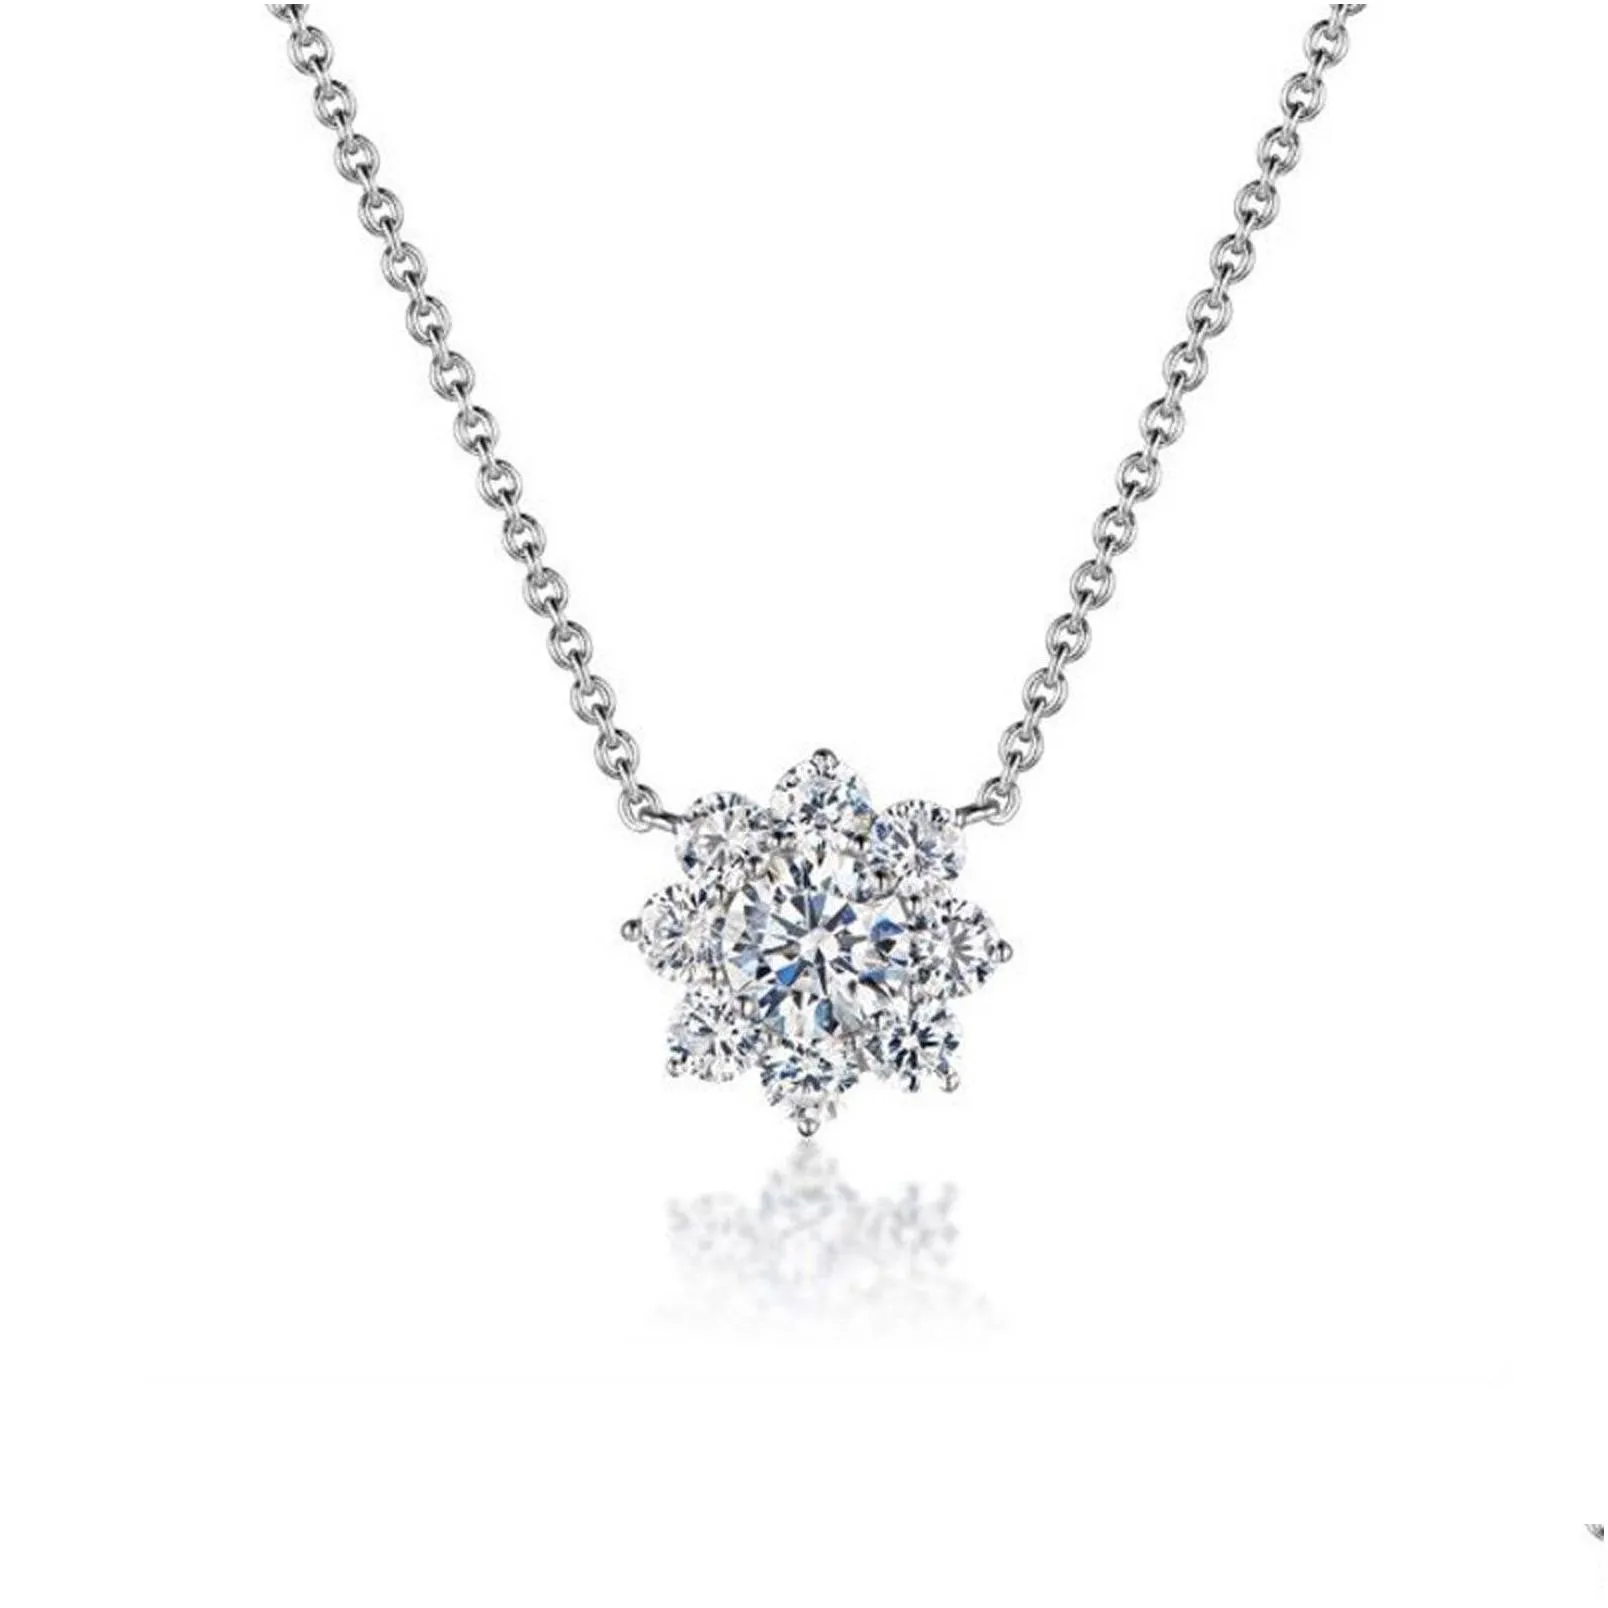 snow flowers necklace zircon forever love necklaces valentines dainty laye jewery for women